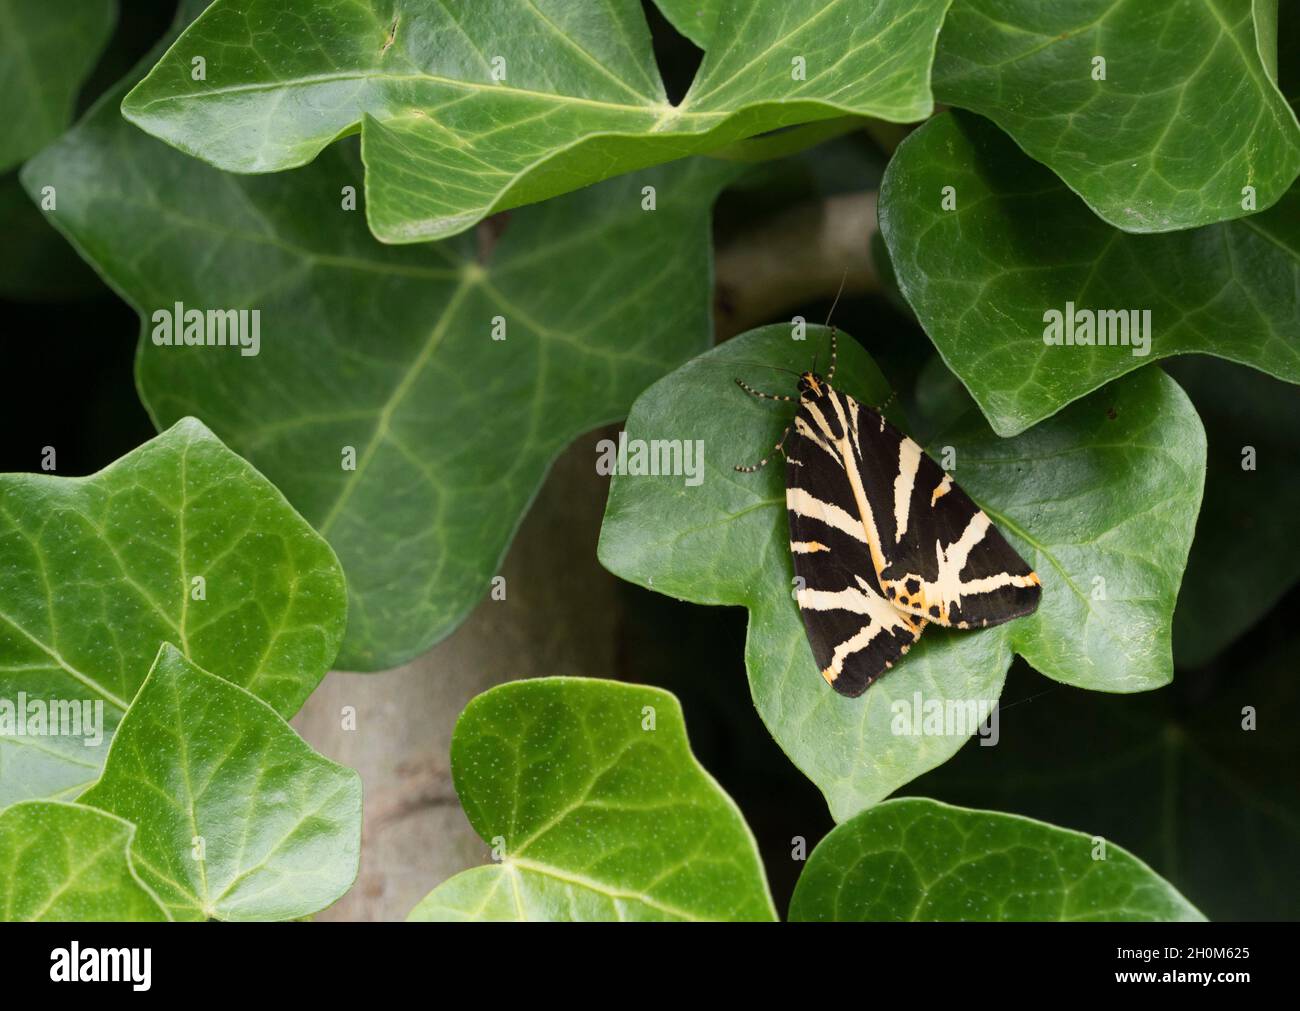 Jersey Tiger, Euplagia quadripunctaria, single adult resting on Ivy leaf, Hedera helix. August. Lea Valley, Essex, UK Stock Photo